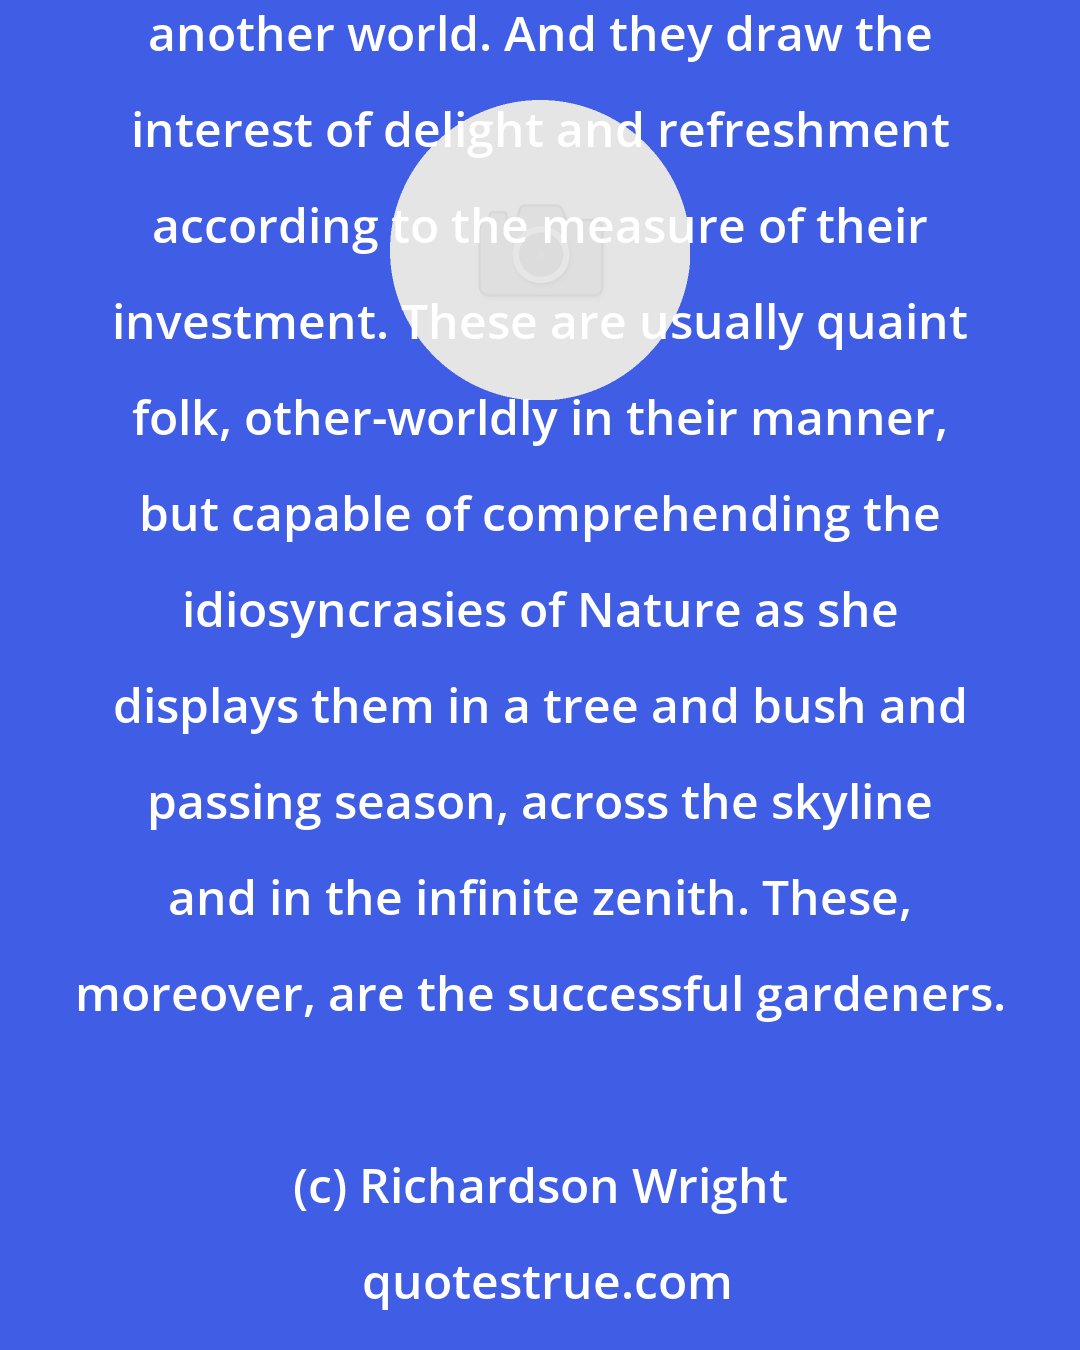 Richardson Wright: Still others make gardens because it is part of a full life. To live happily they must invest their hours and aspirations in the activities of another world. And they draw the interest of delight and refreshment according to the measure of their investment. These are usually quaint folk, other-worldly in their manner, but capable of comprehending the idiosyncrasies of Nature as she displays them in a tree and bush and passing season, across the skyline and in the infinite zenith. These, moreover, are the successful gardeners.